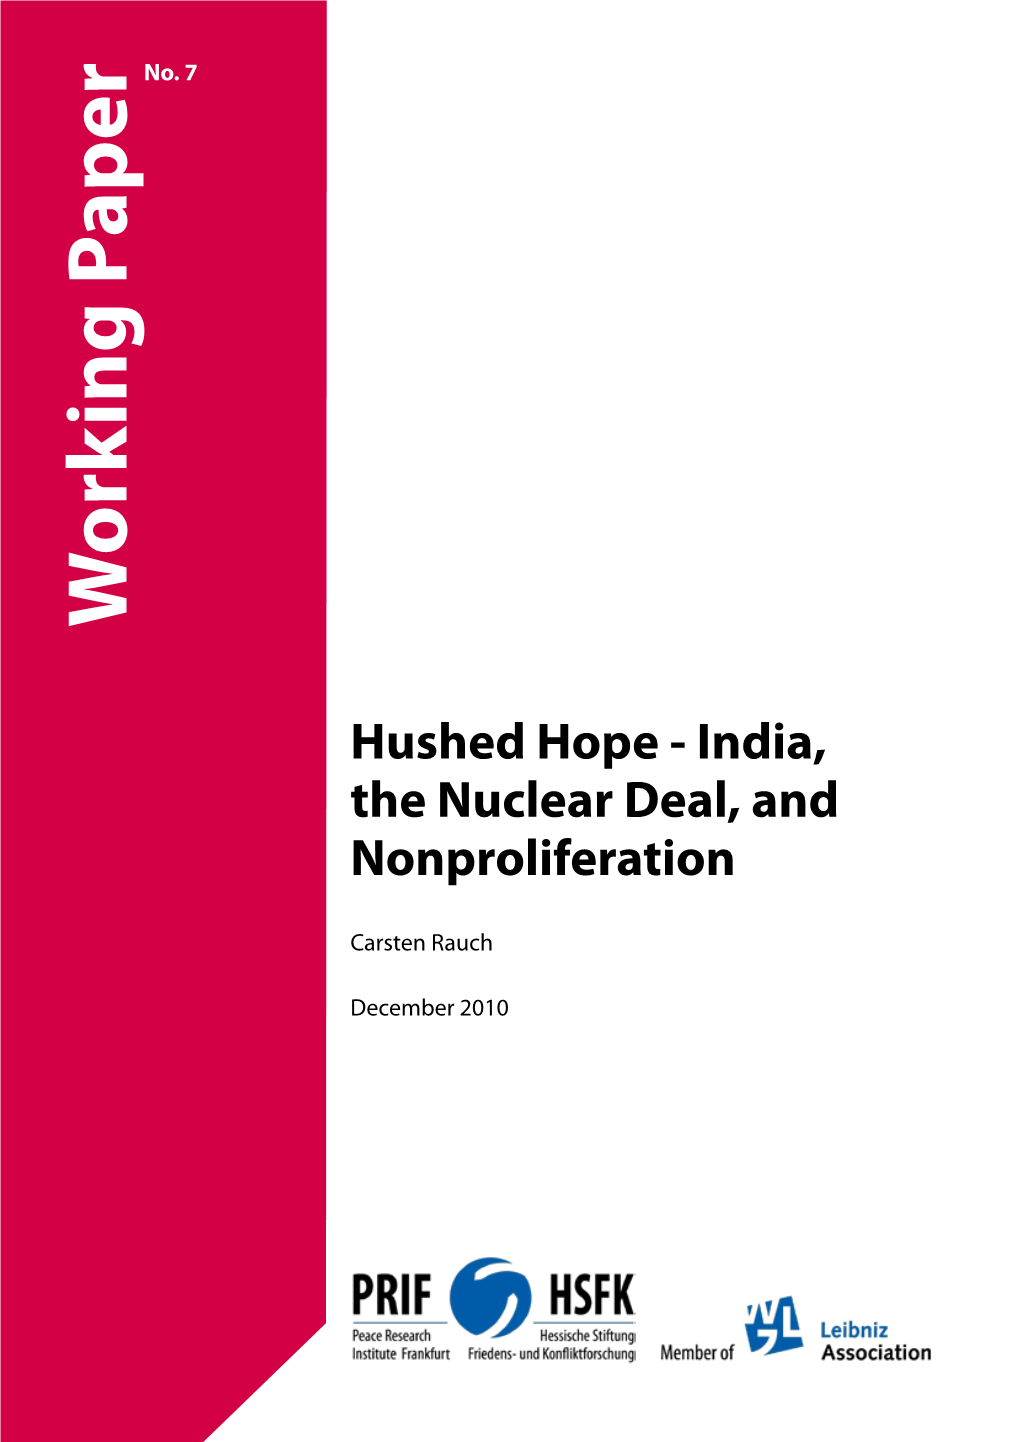 India, the Nuclear Deal, and Nonproliferation